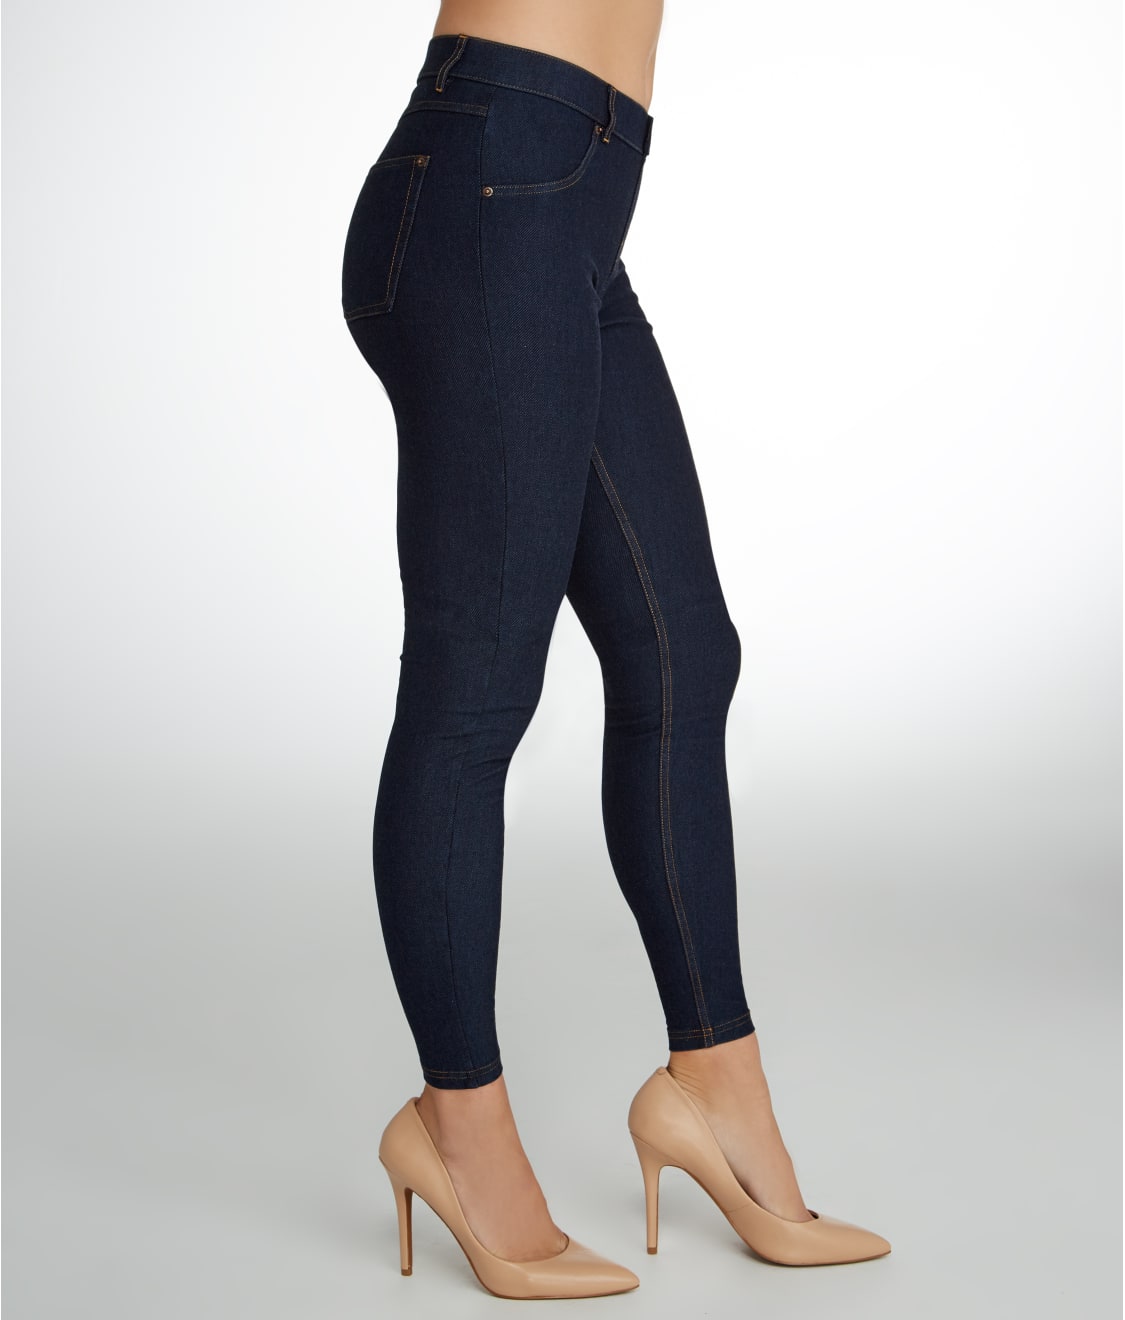 Leggings by HUE  Bare Necessities